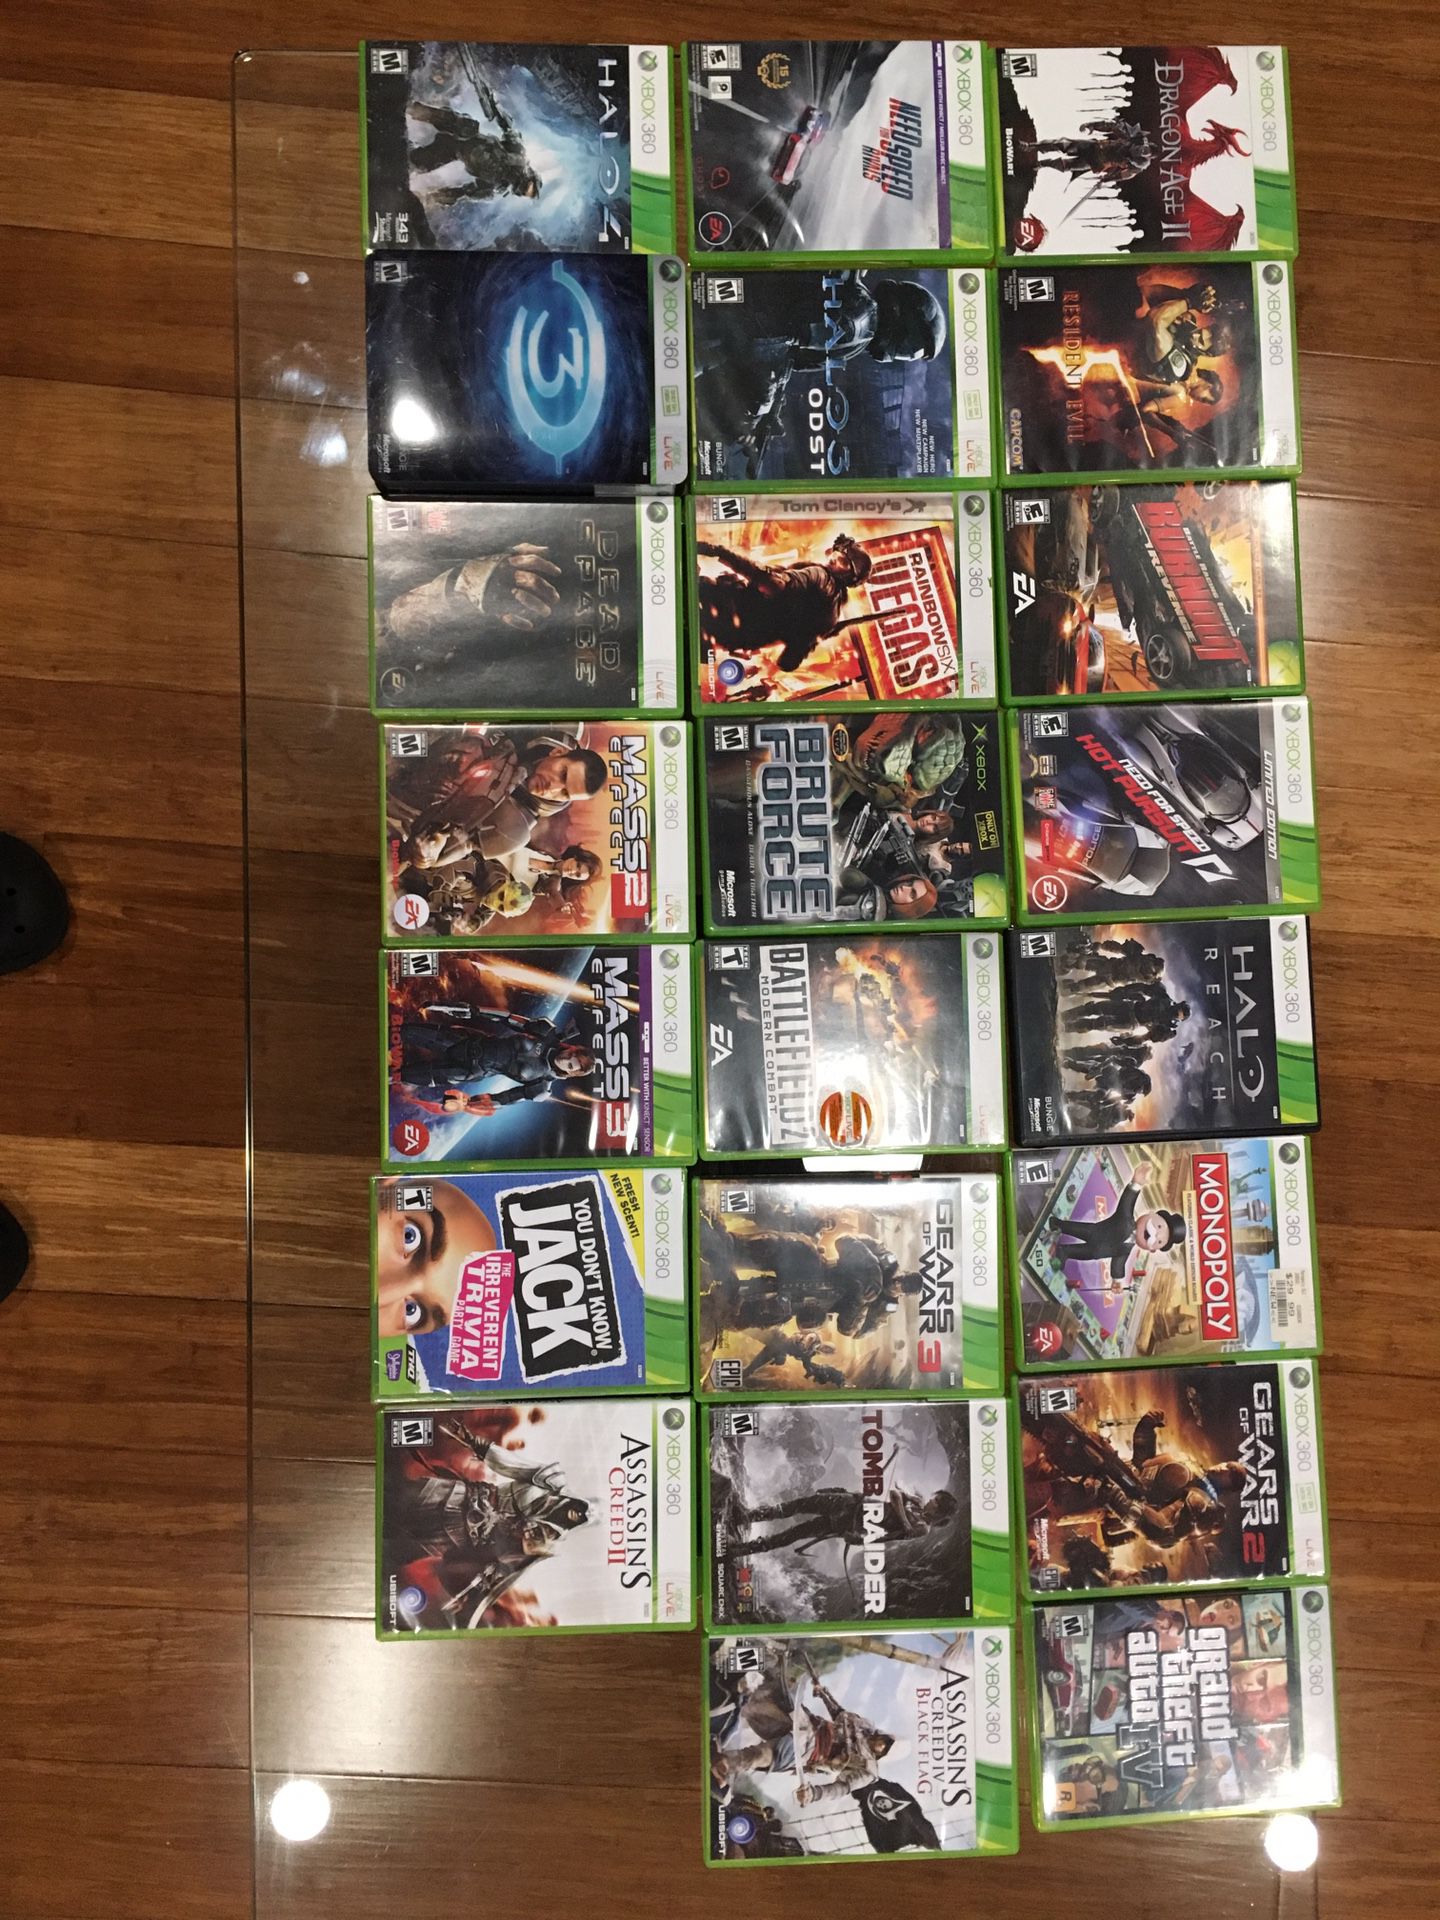 X-box 360 games. $5 each game. $50 for all 23 games.